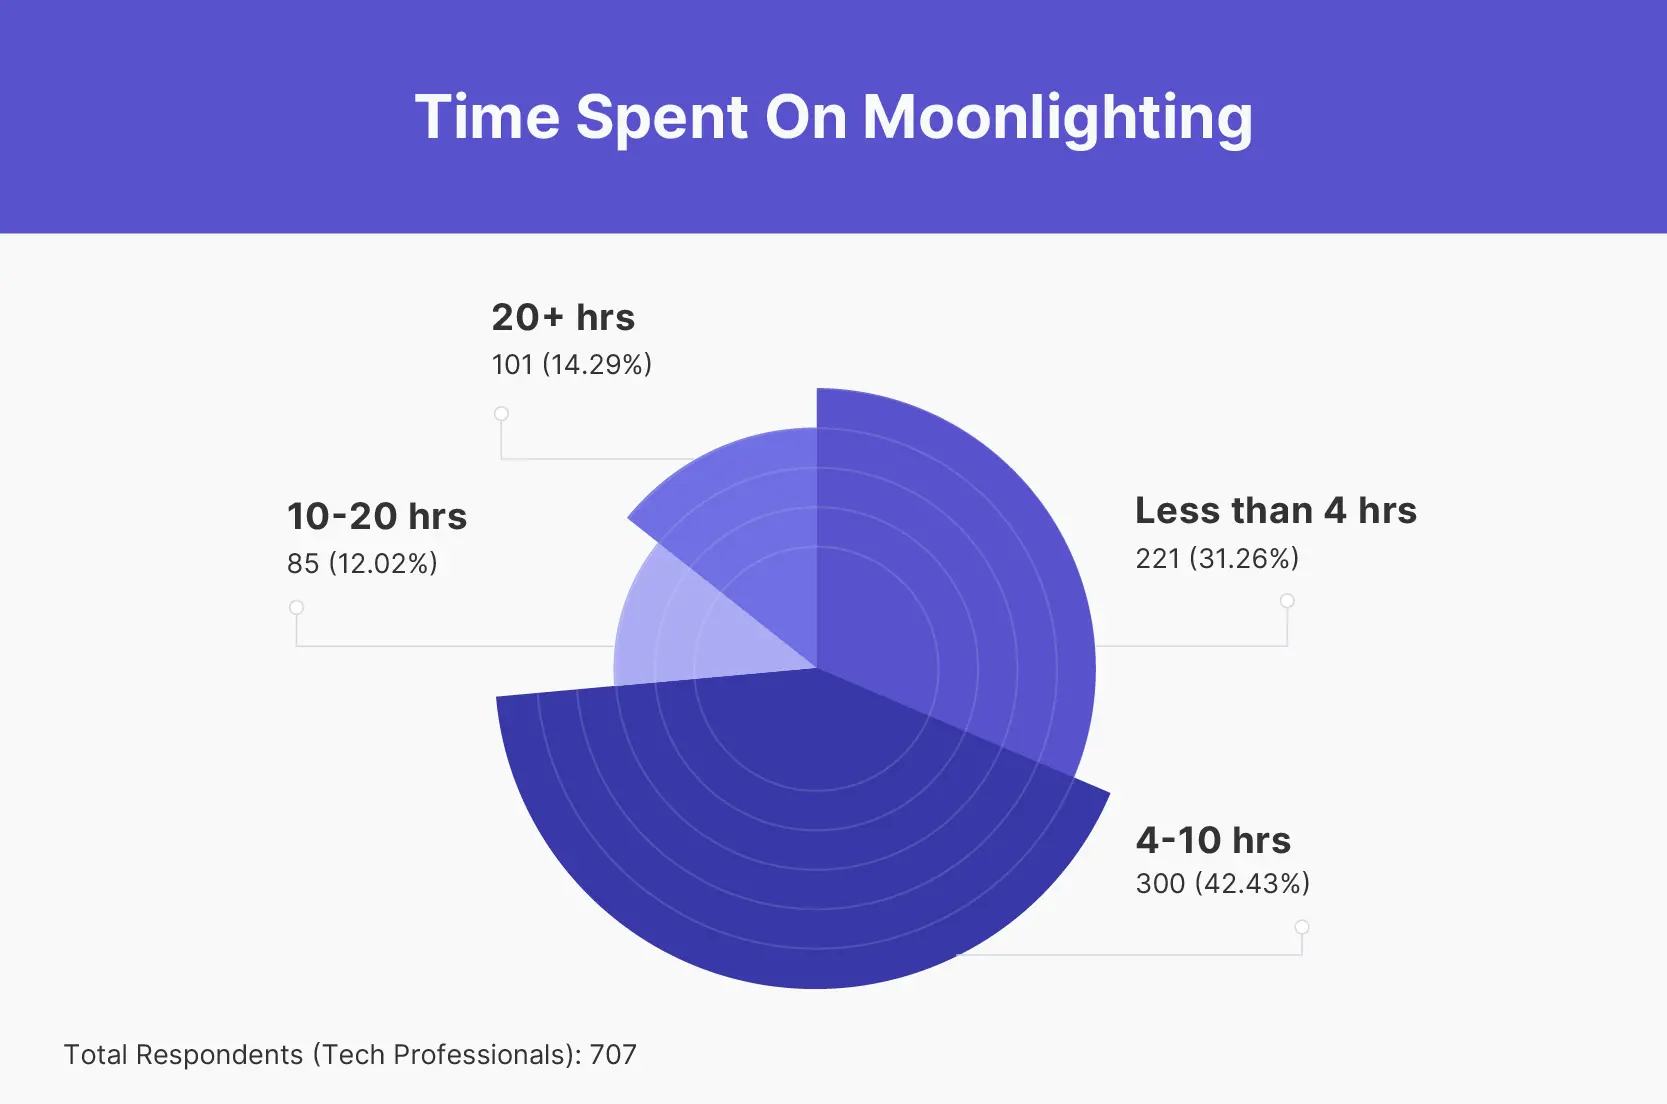 Does moonlighting affect productivity at the primary job?